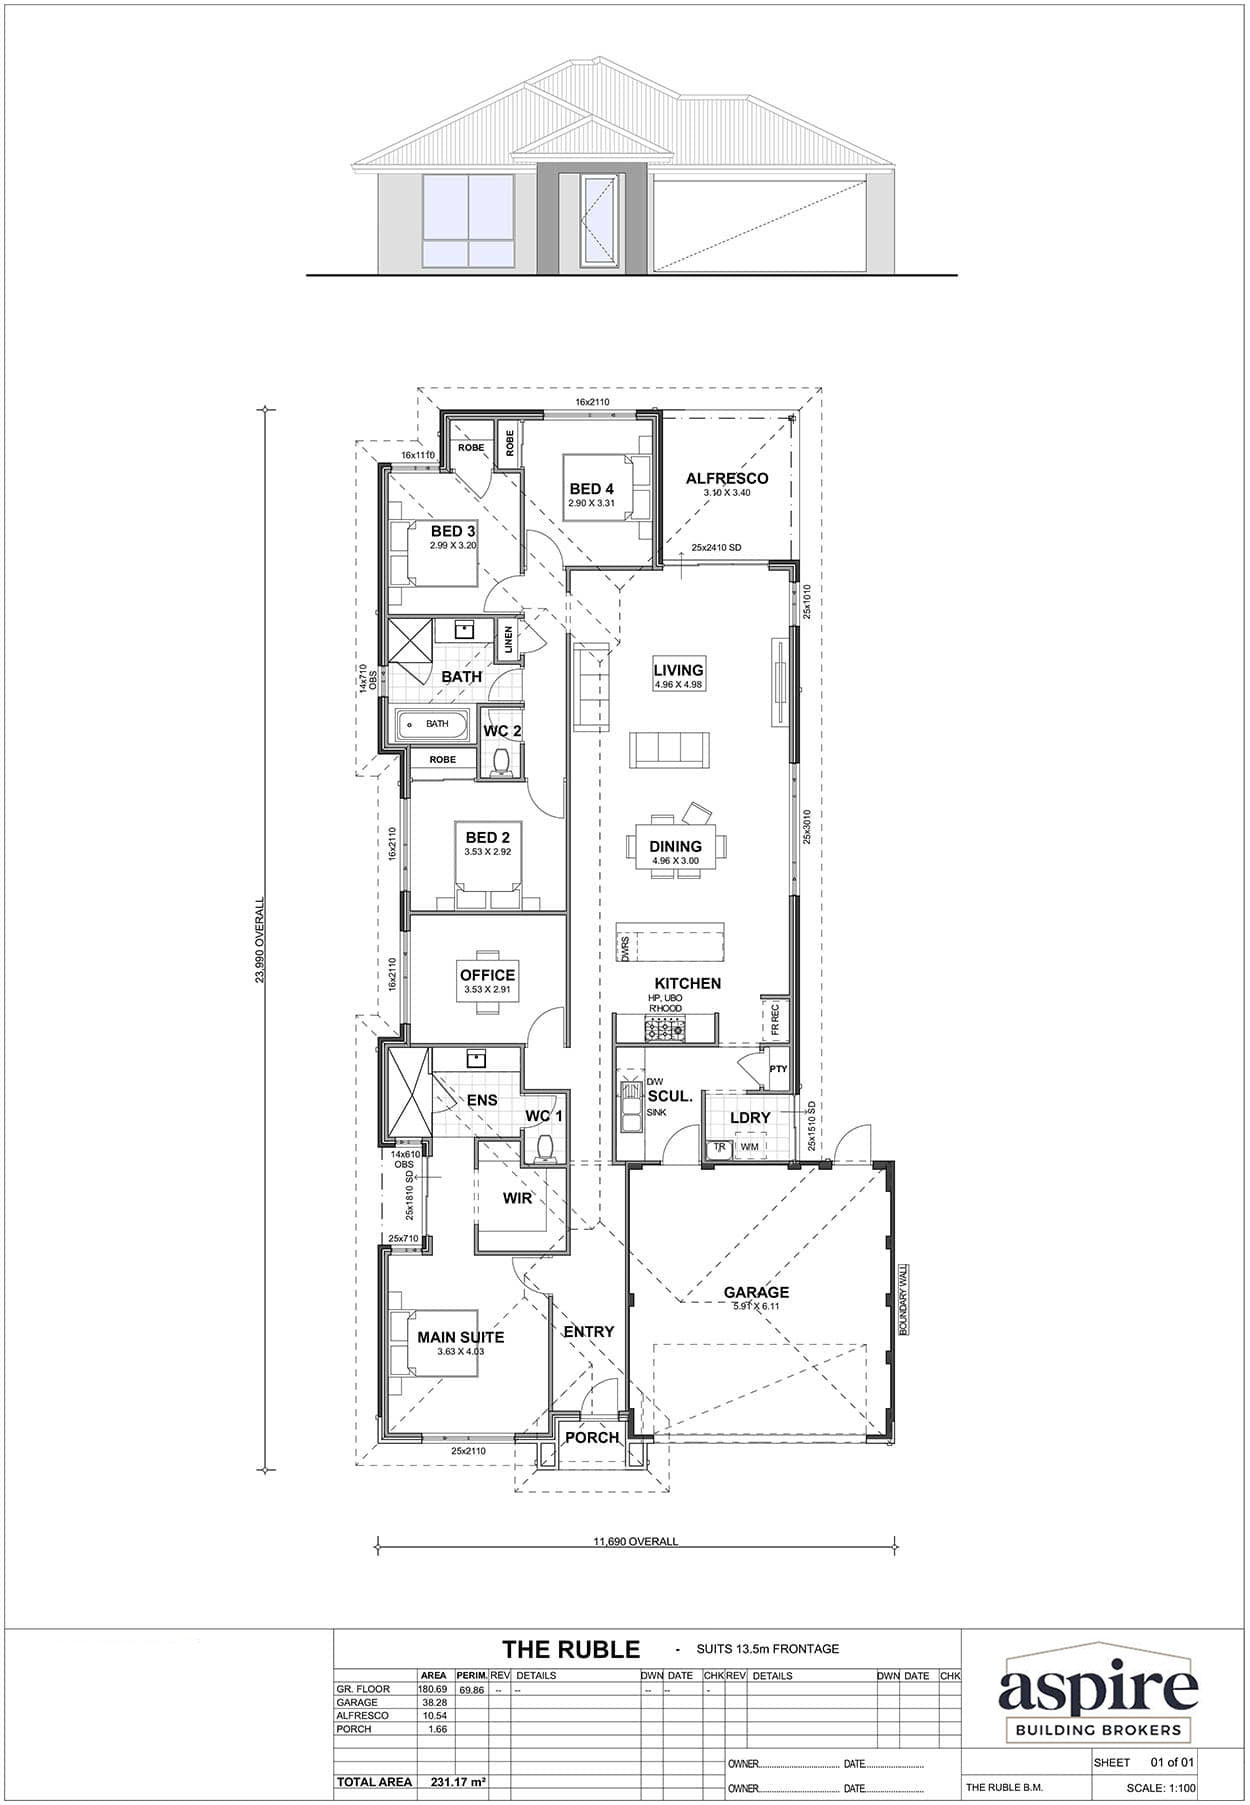 The Ruble Floor Plan - Perth New Build Home Designs. 4 Bedrooms and 13.5m Block Width. Aspire Building Brokers